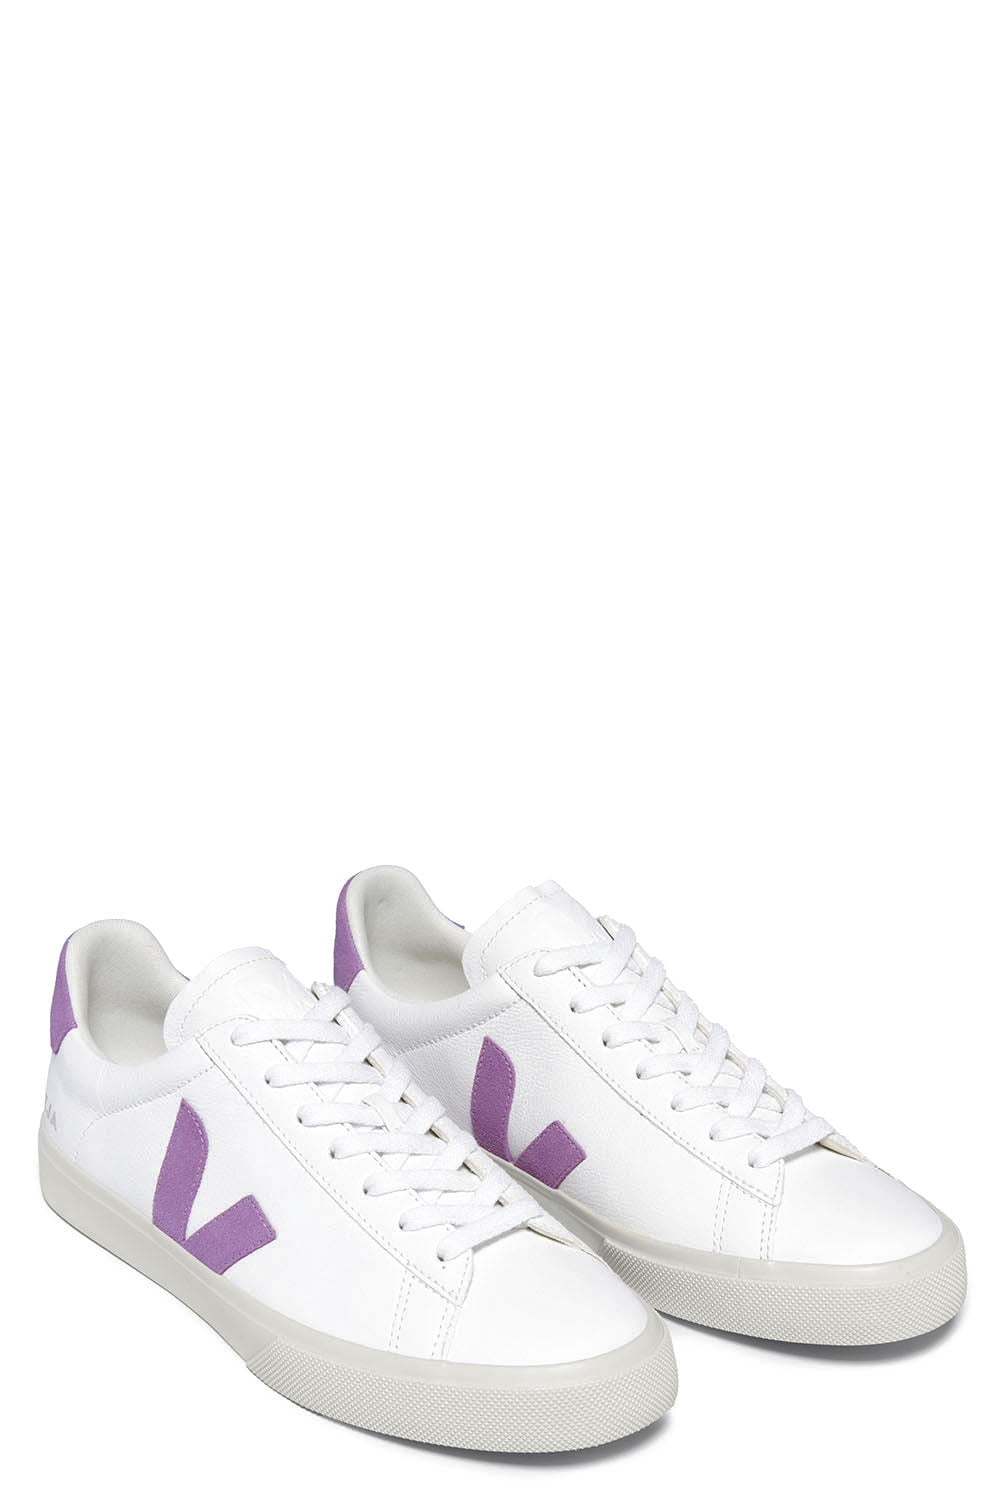 VEJA-Campo Sneaker - Extra White Mulberry-